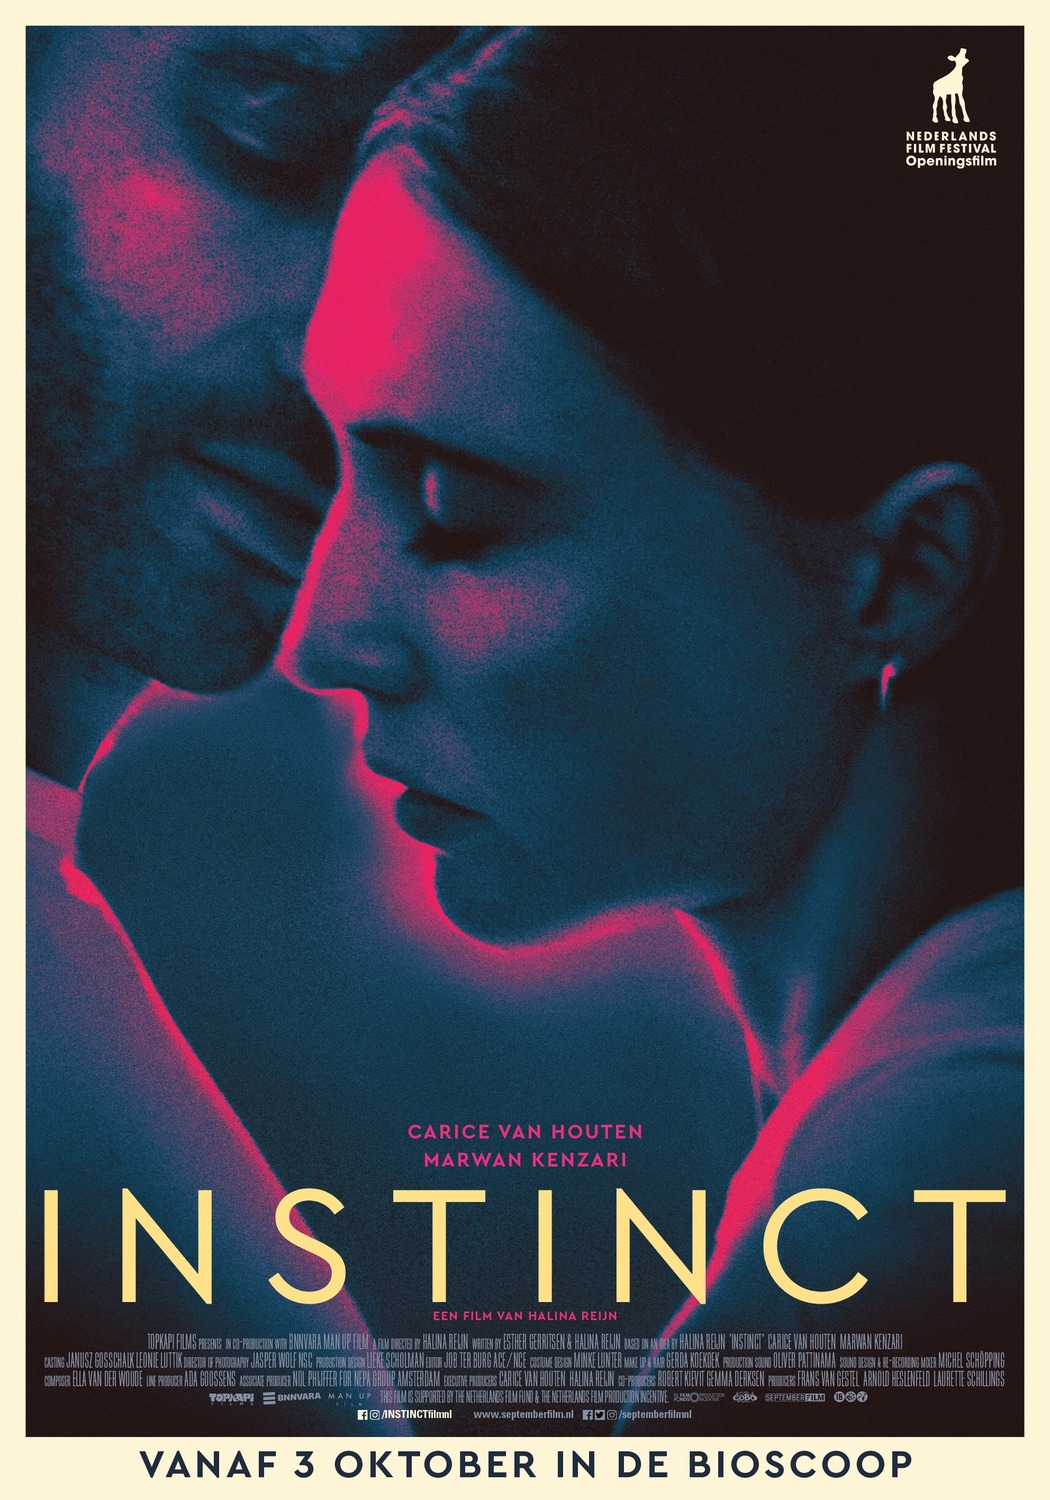 Extra Large Movie Poster Image for Instinct 